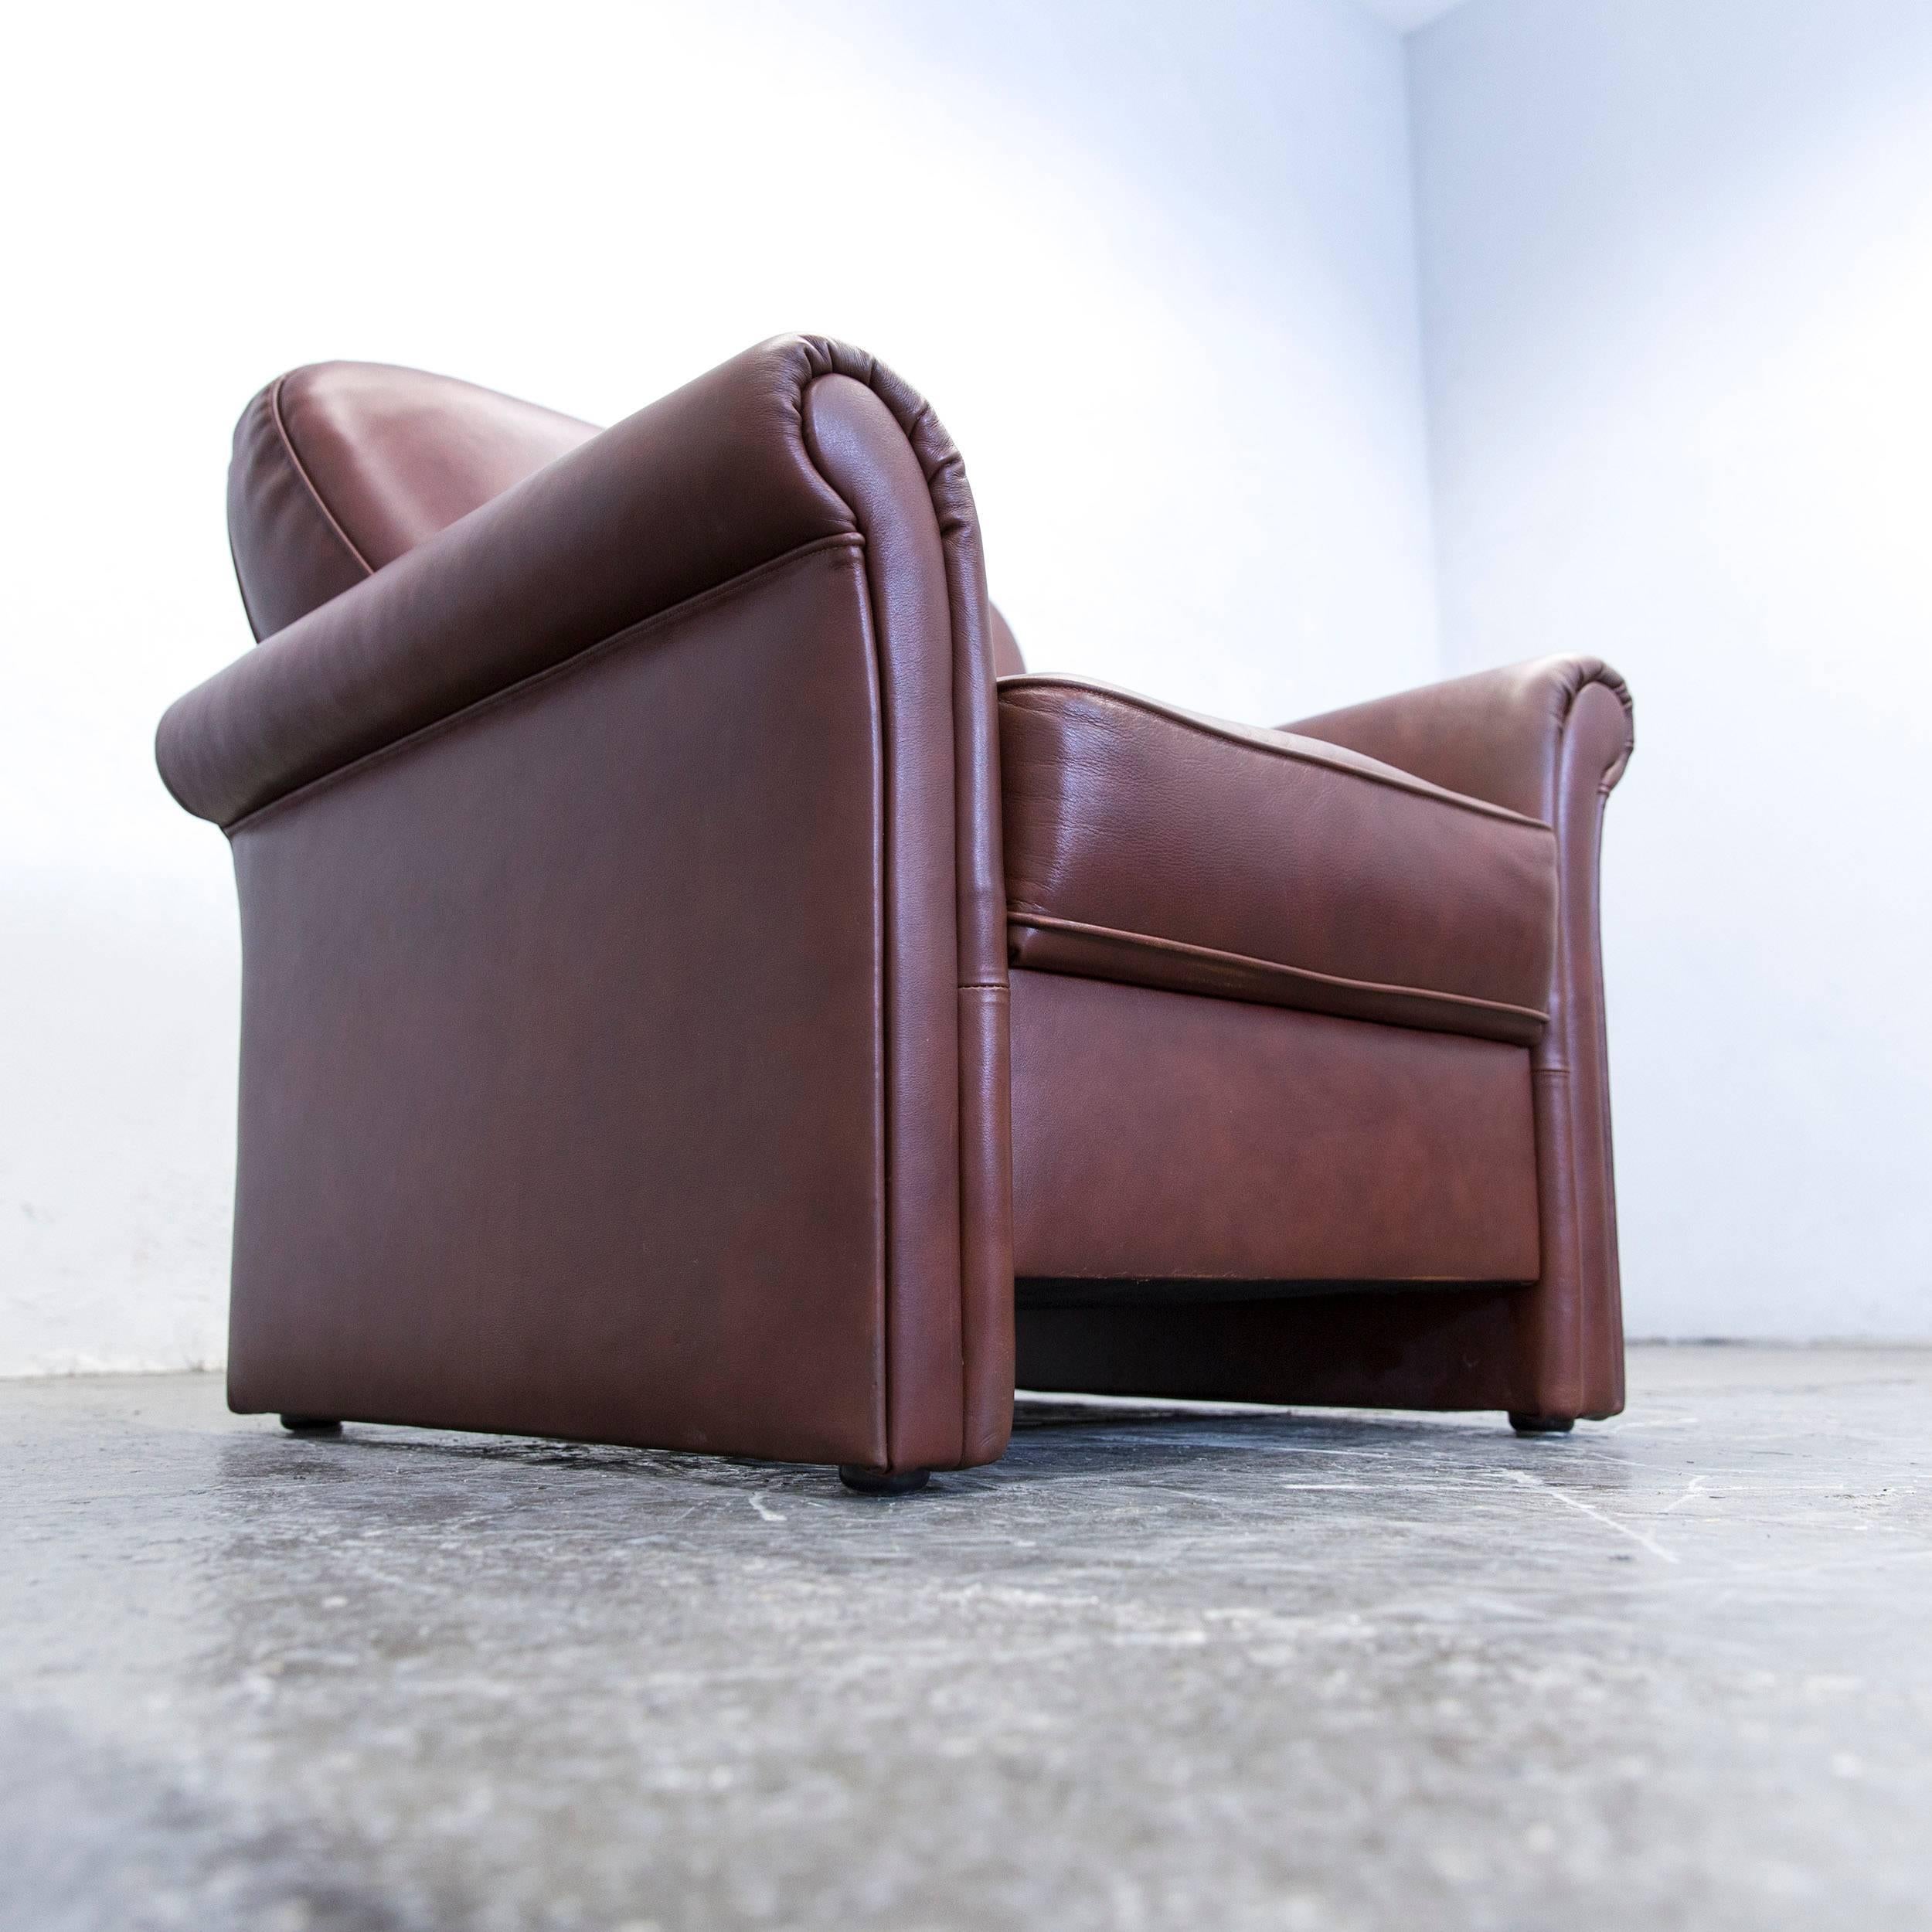 Gepade Akad´or Designer Armchair Leather Brown One-seat Couch Modern 2